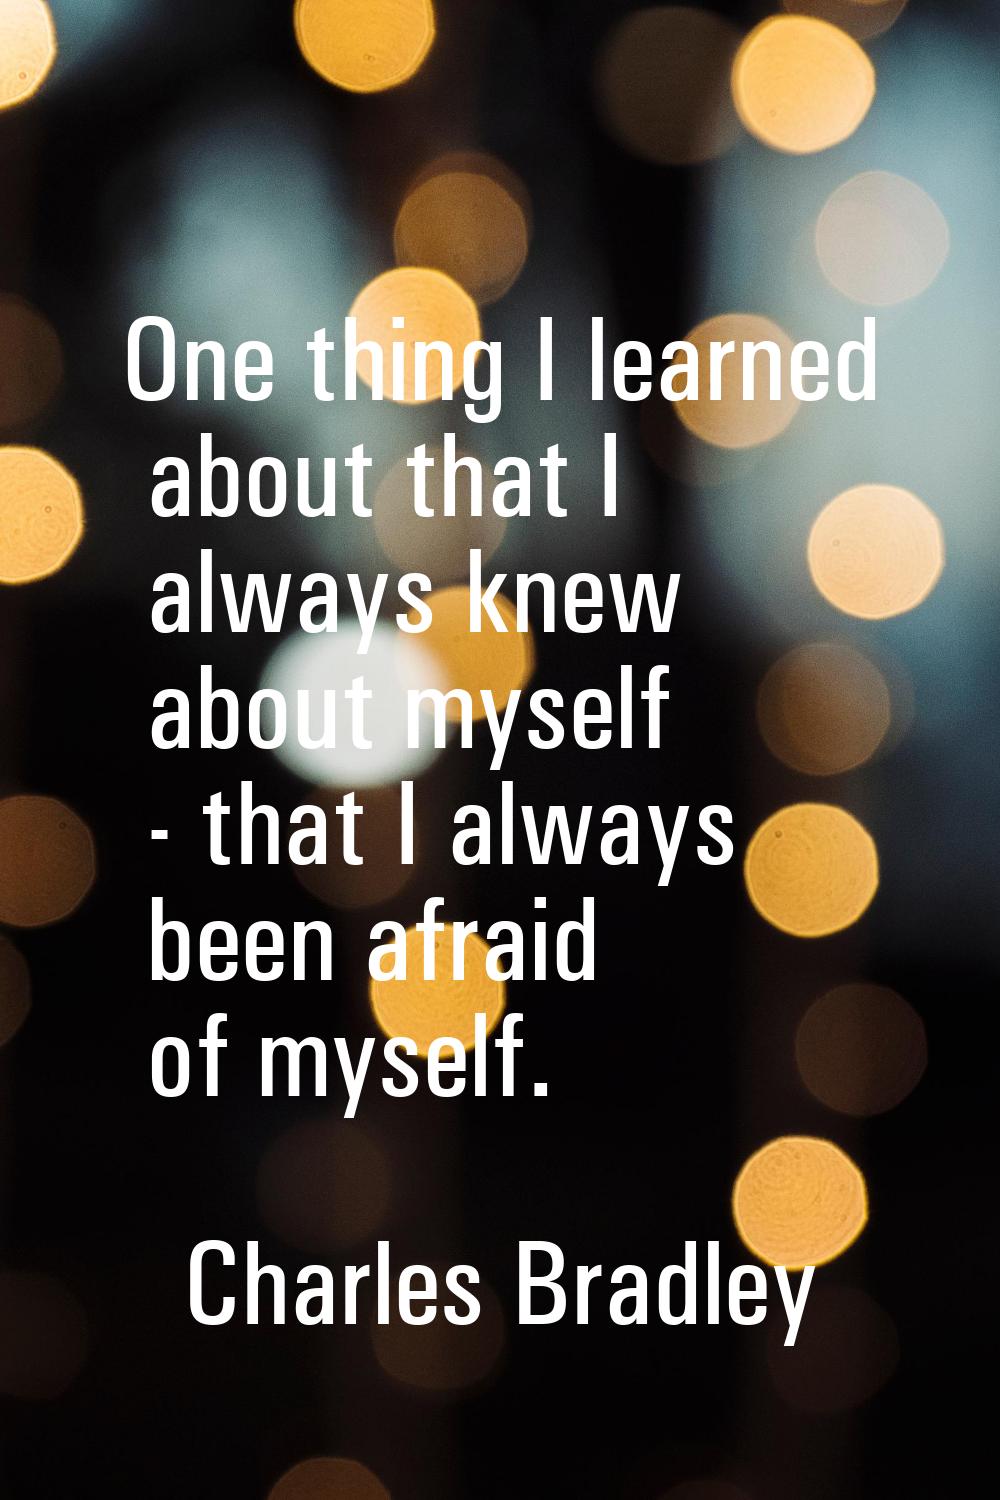 One thing I learned about that I always knew about myself - that I always been afraid of myself.